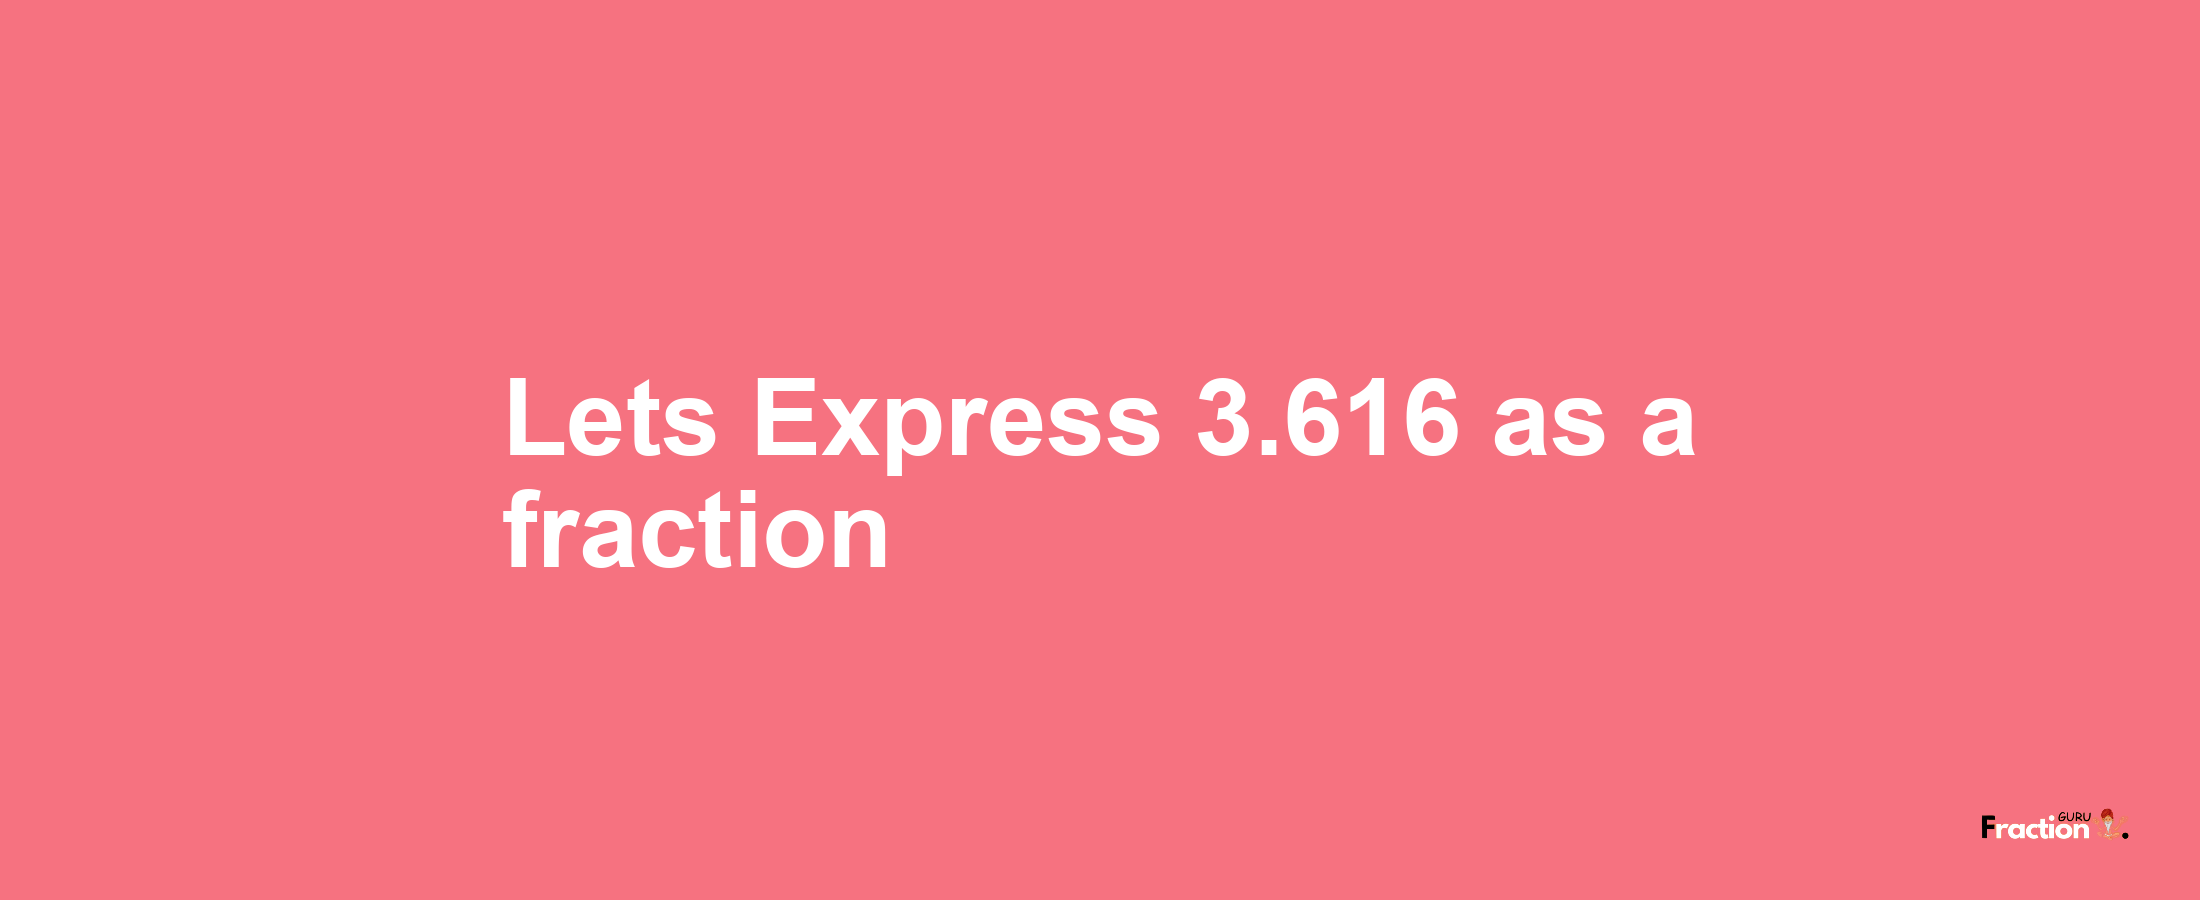 Lets Express 3.616 as afraction